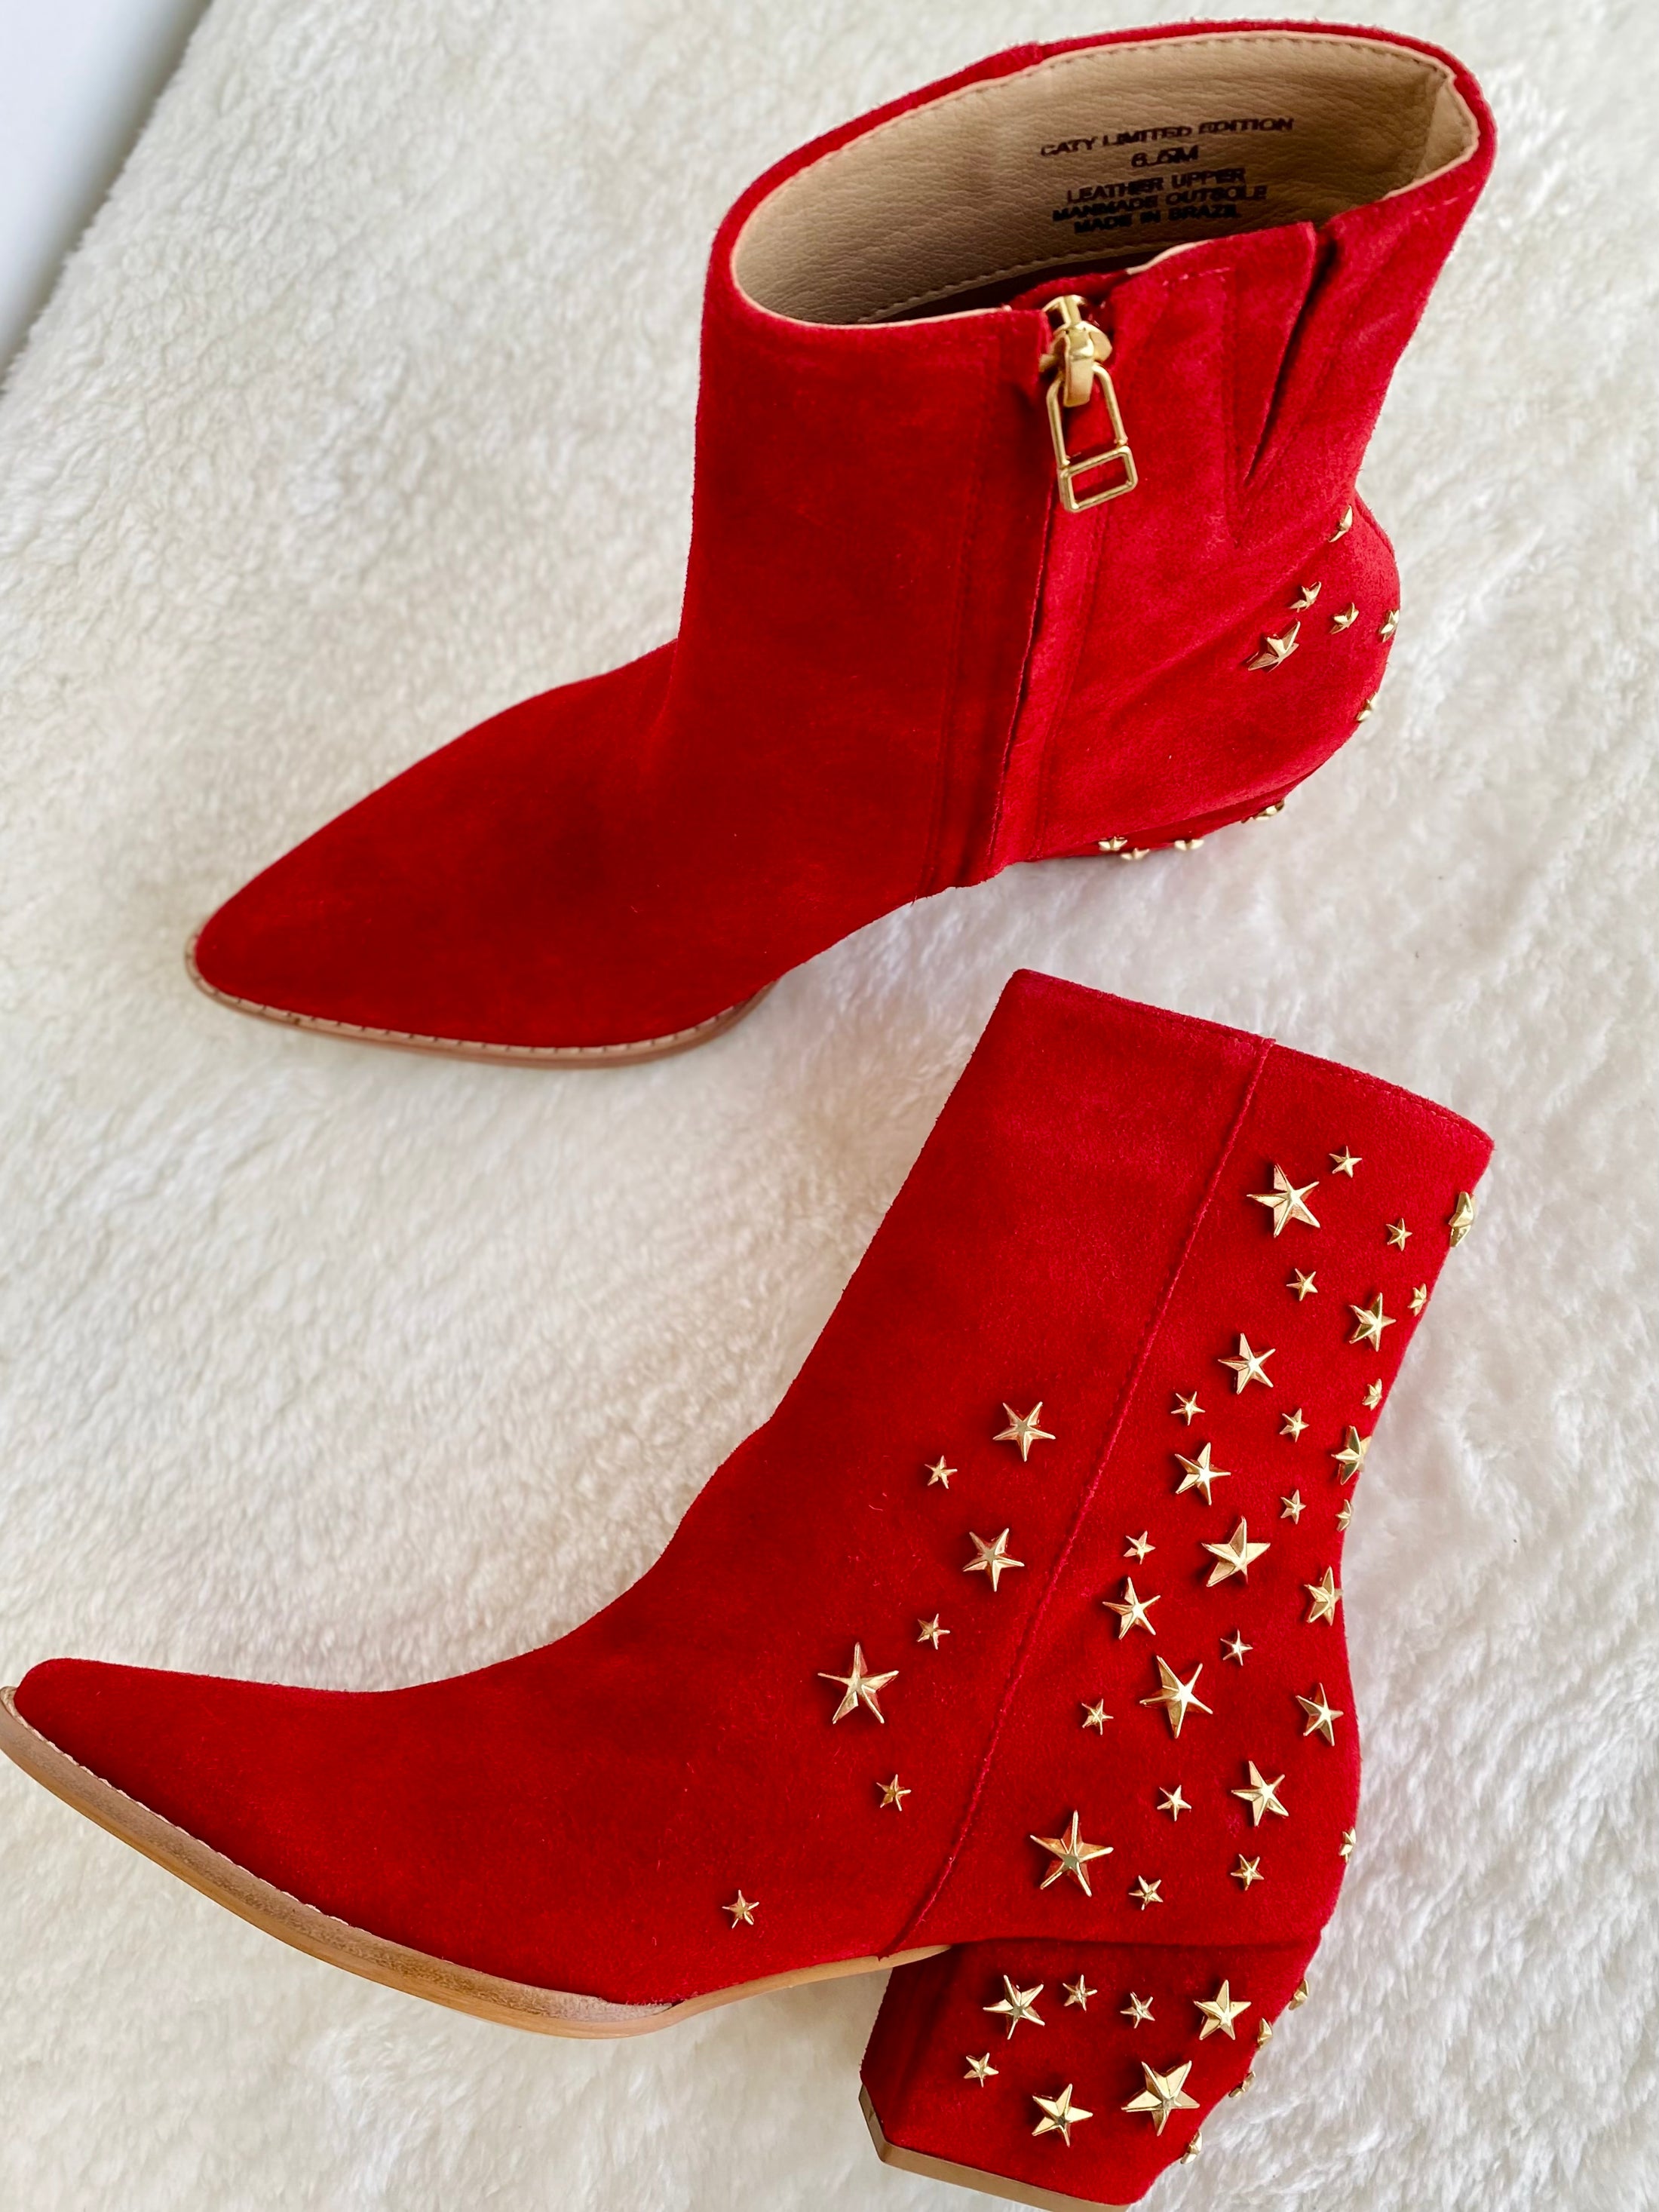 Red boots with red stars, Whimsy Whoo Boutique Red Boots, Gold Star details